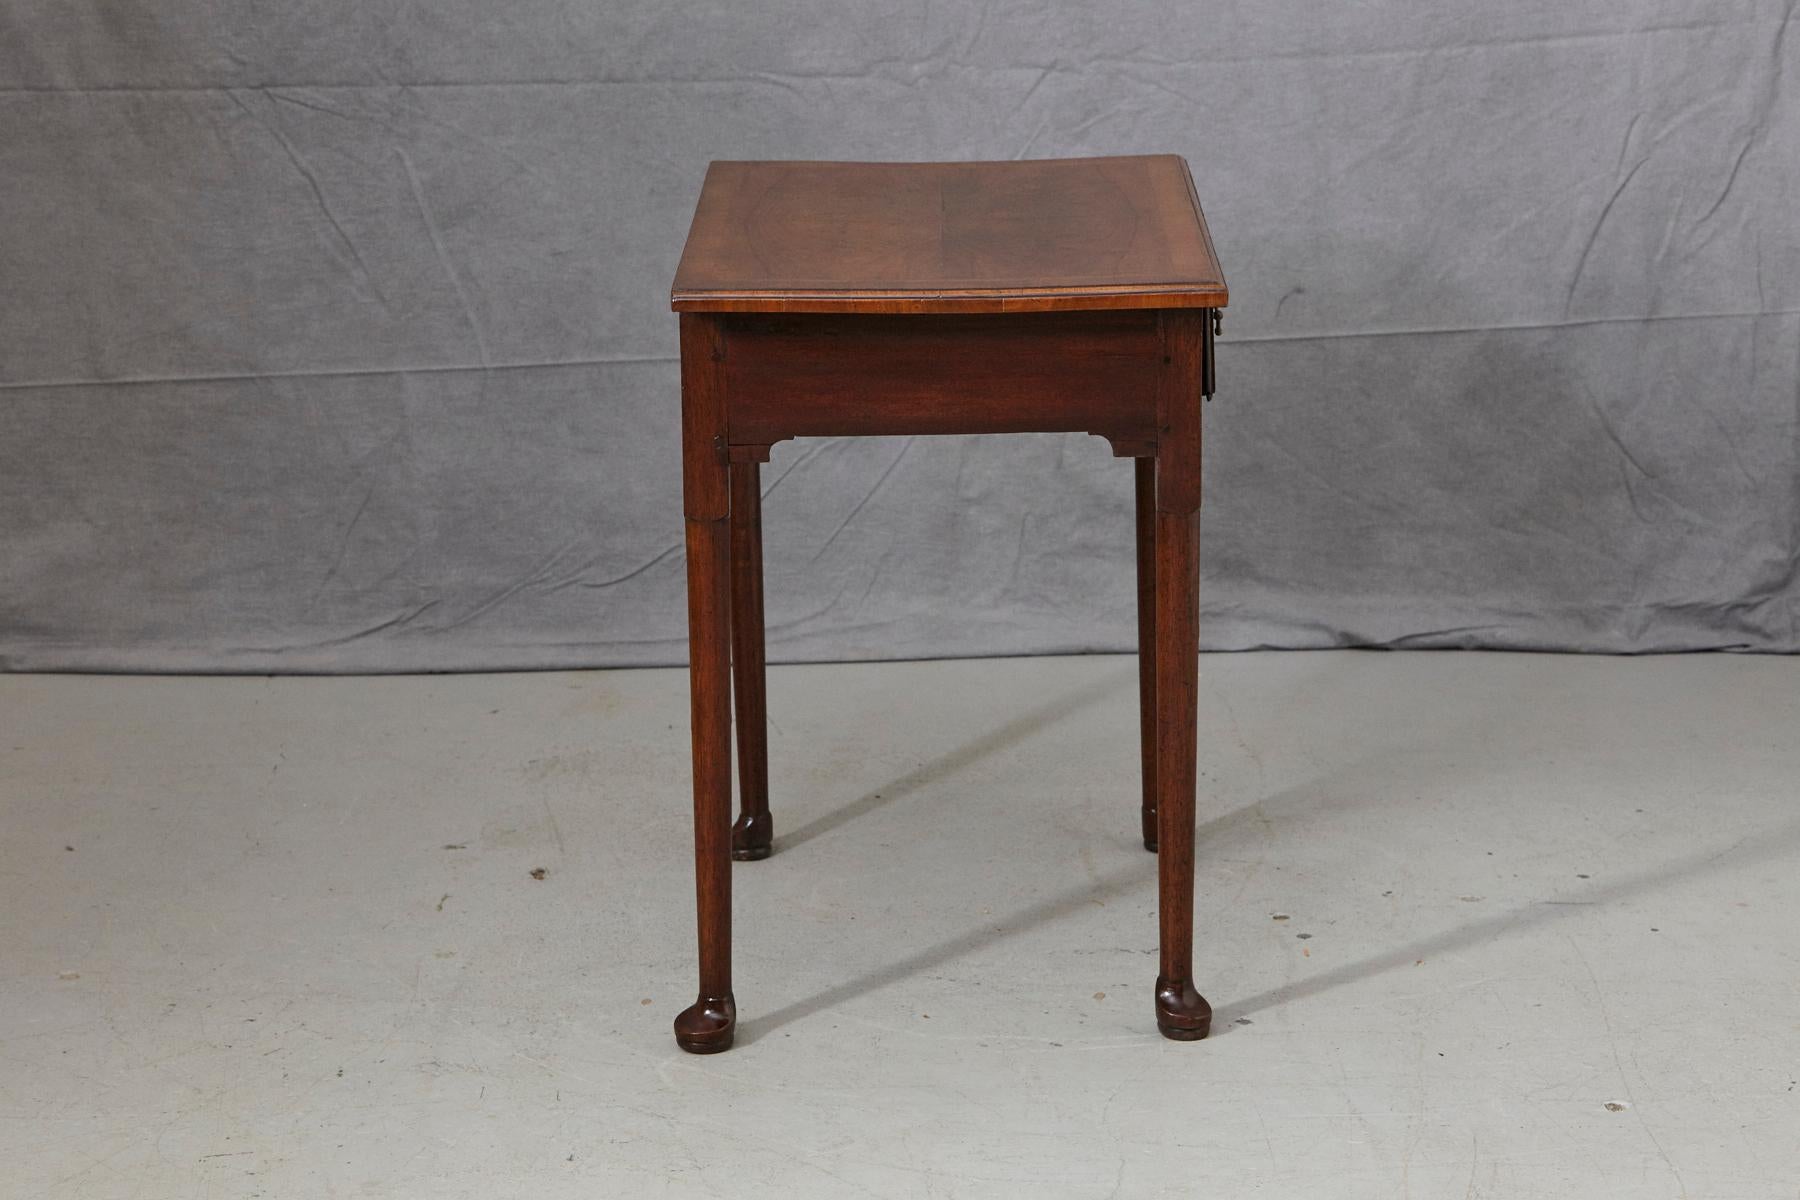 19th Century Queen Anne Style Walnut Side Table with Wood Inlays and Brass Hardware